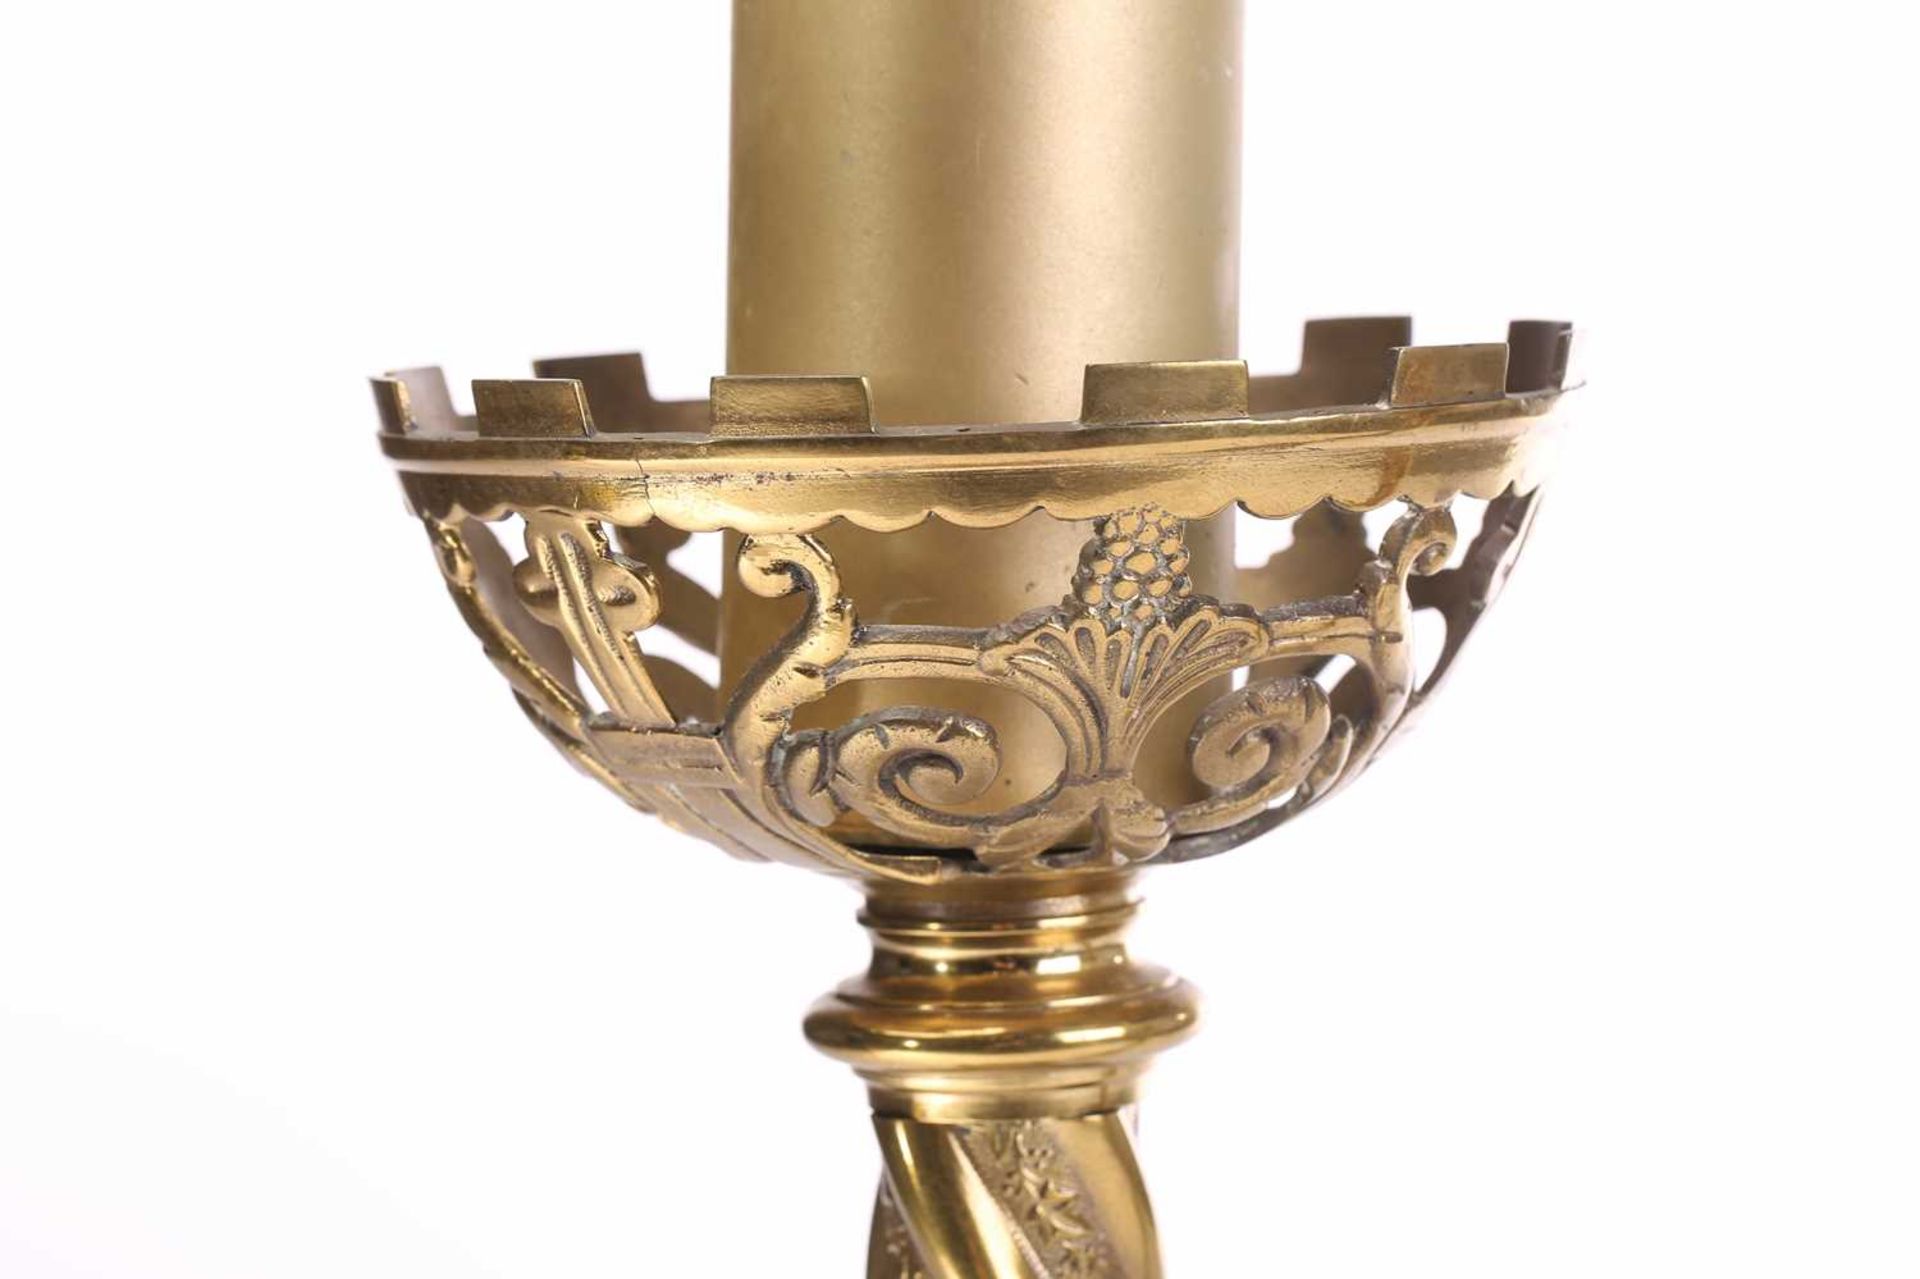 A pair of 19th-century "Ecclesiastic- Gothic" gilt brass table lamps with pierced cup drip pans - Image 3 of 6